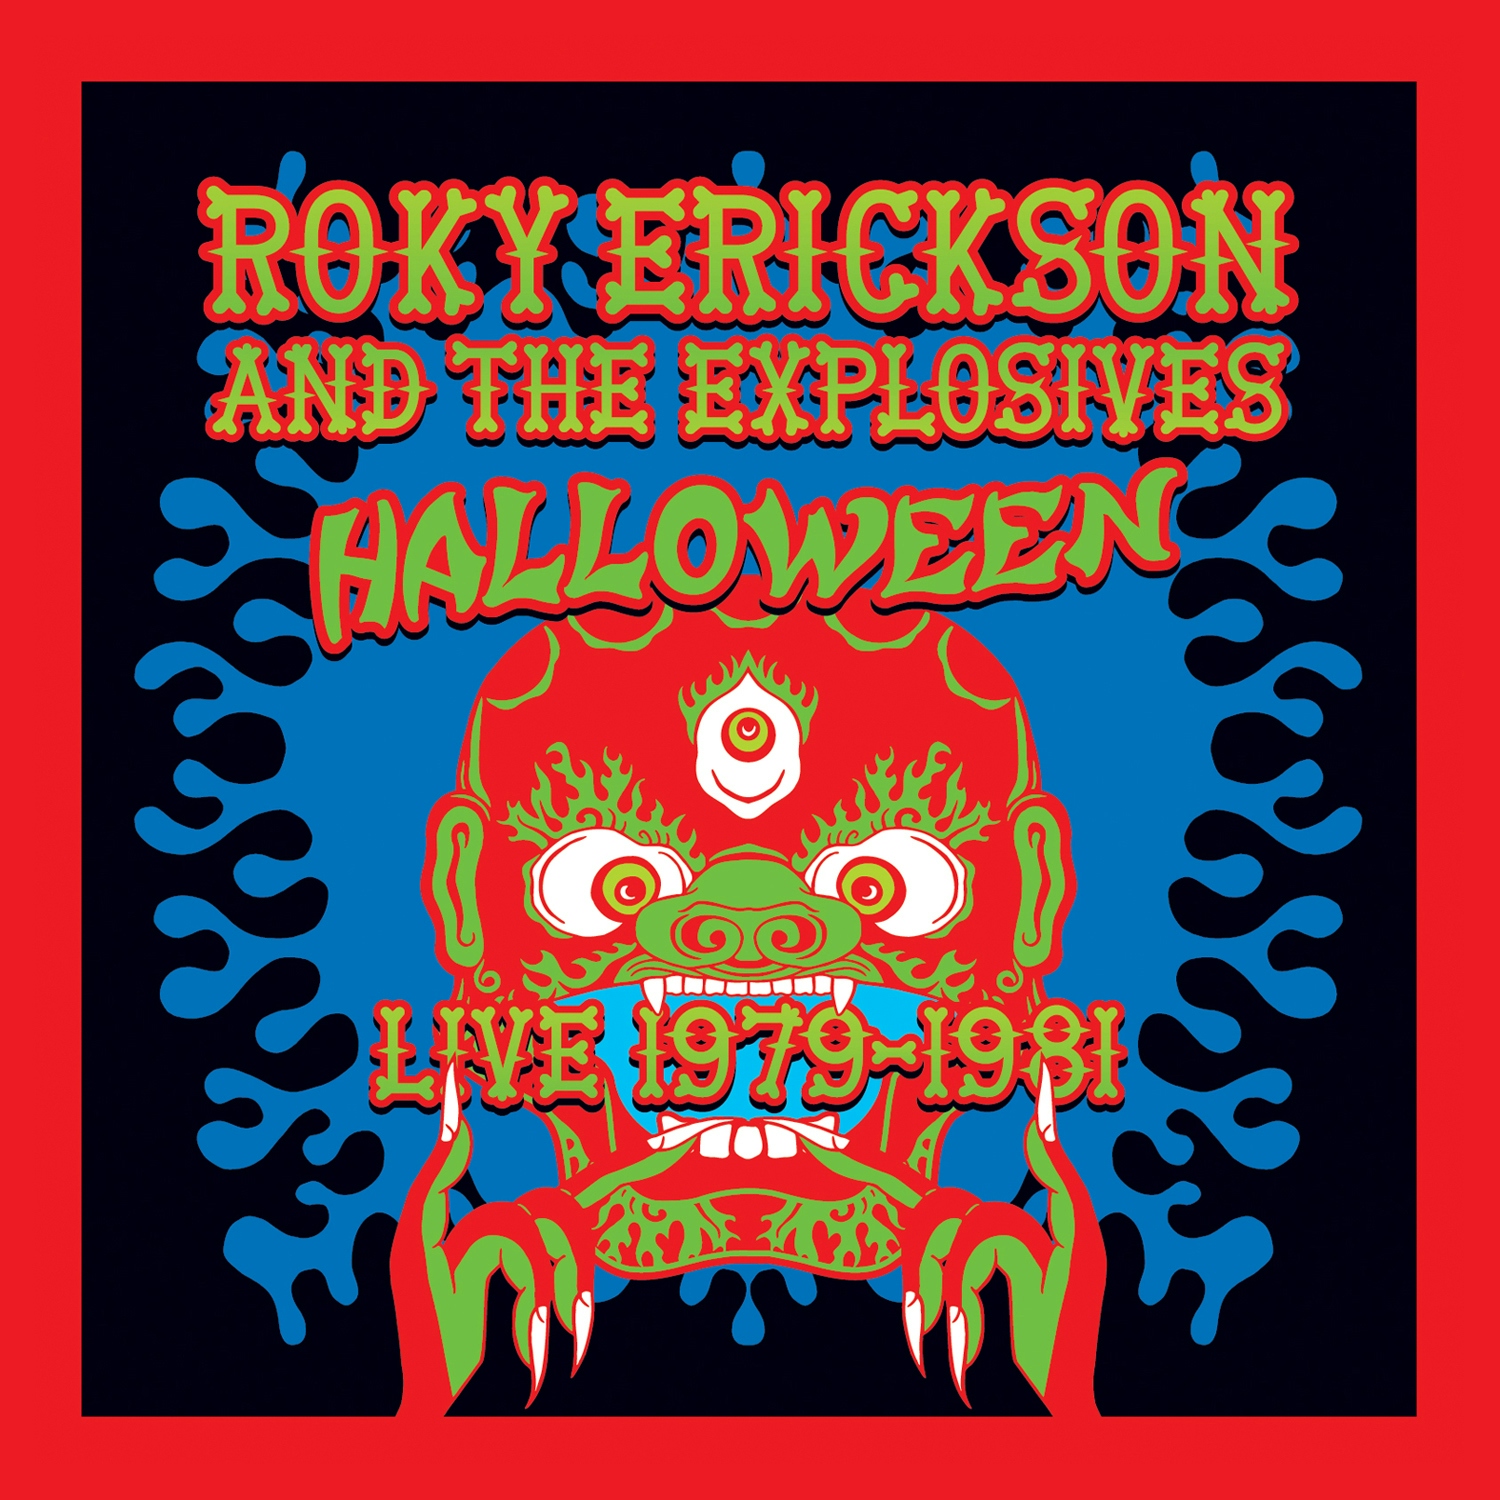 Album artwork for Album artwork for Halloween: Live 1979-1981 by Roky Erickson and The Explosives by Halloween: Live 1979-1981 - Roky Erickson and The Explosives